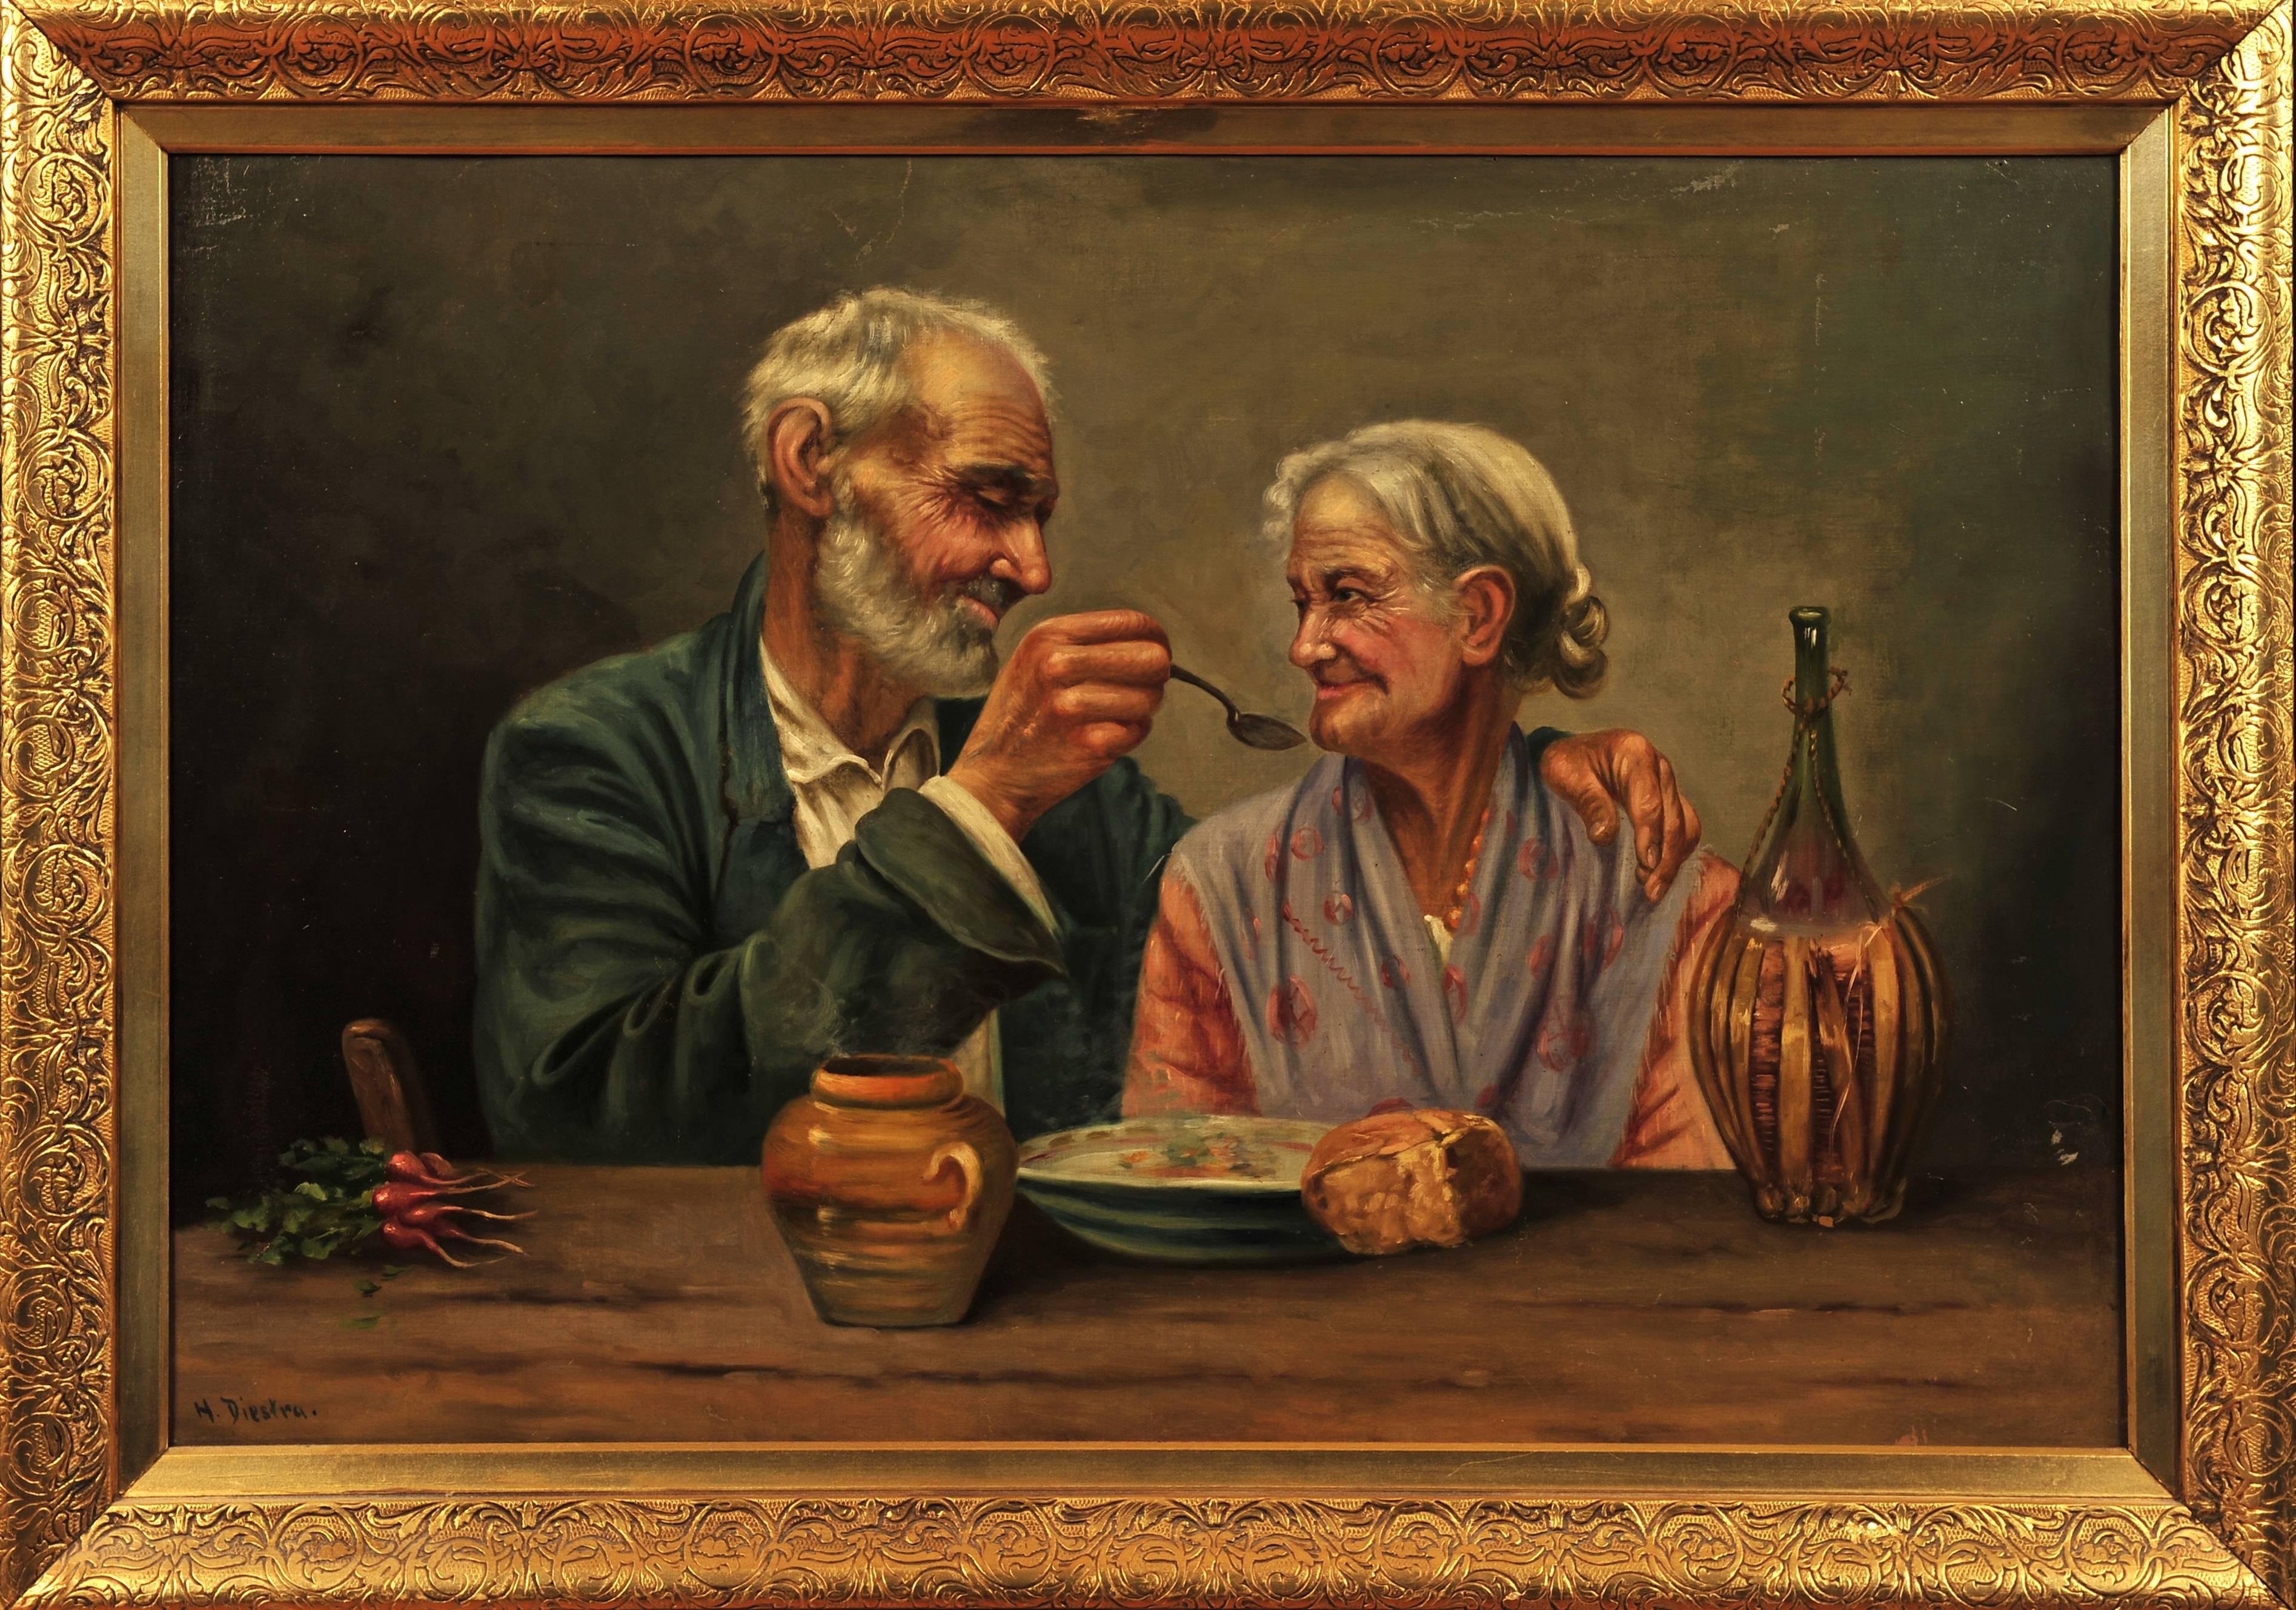 An Ageless Love - Painting by M. Dikstra